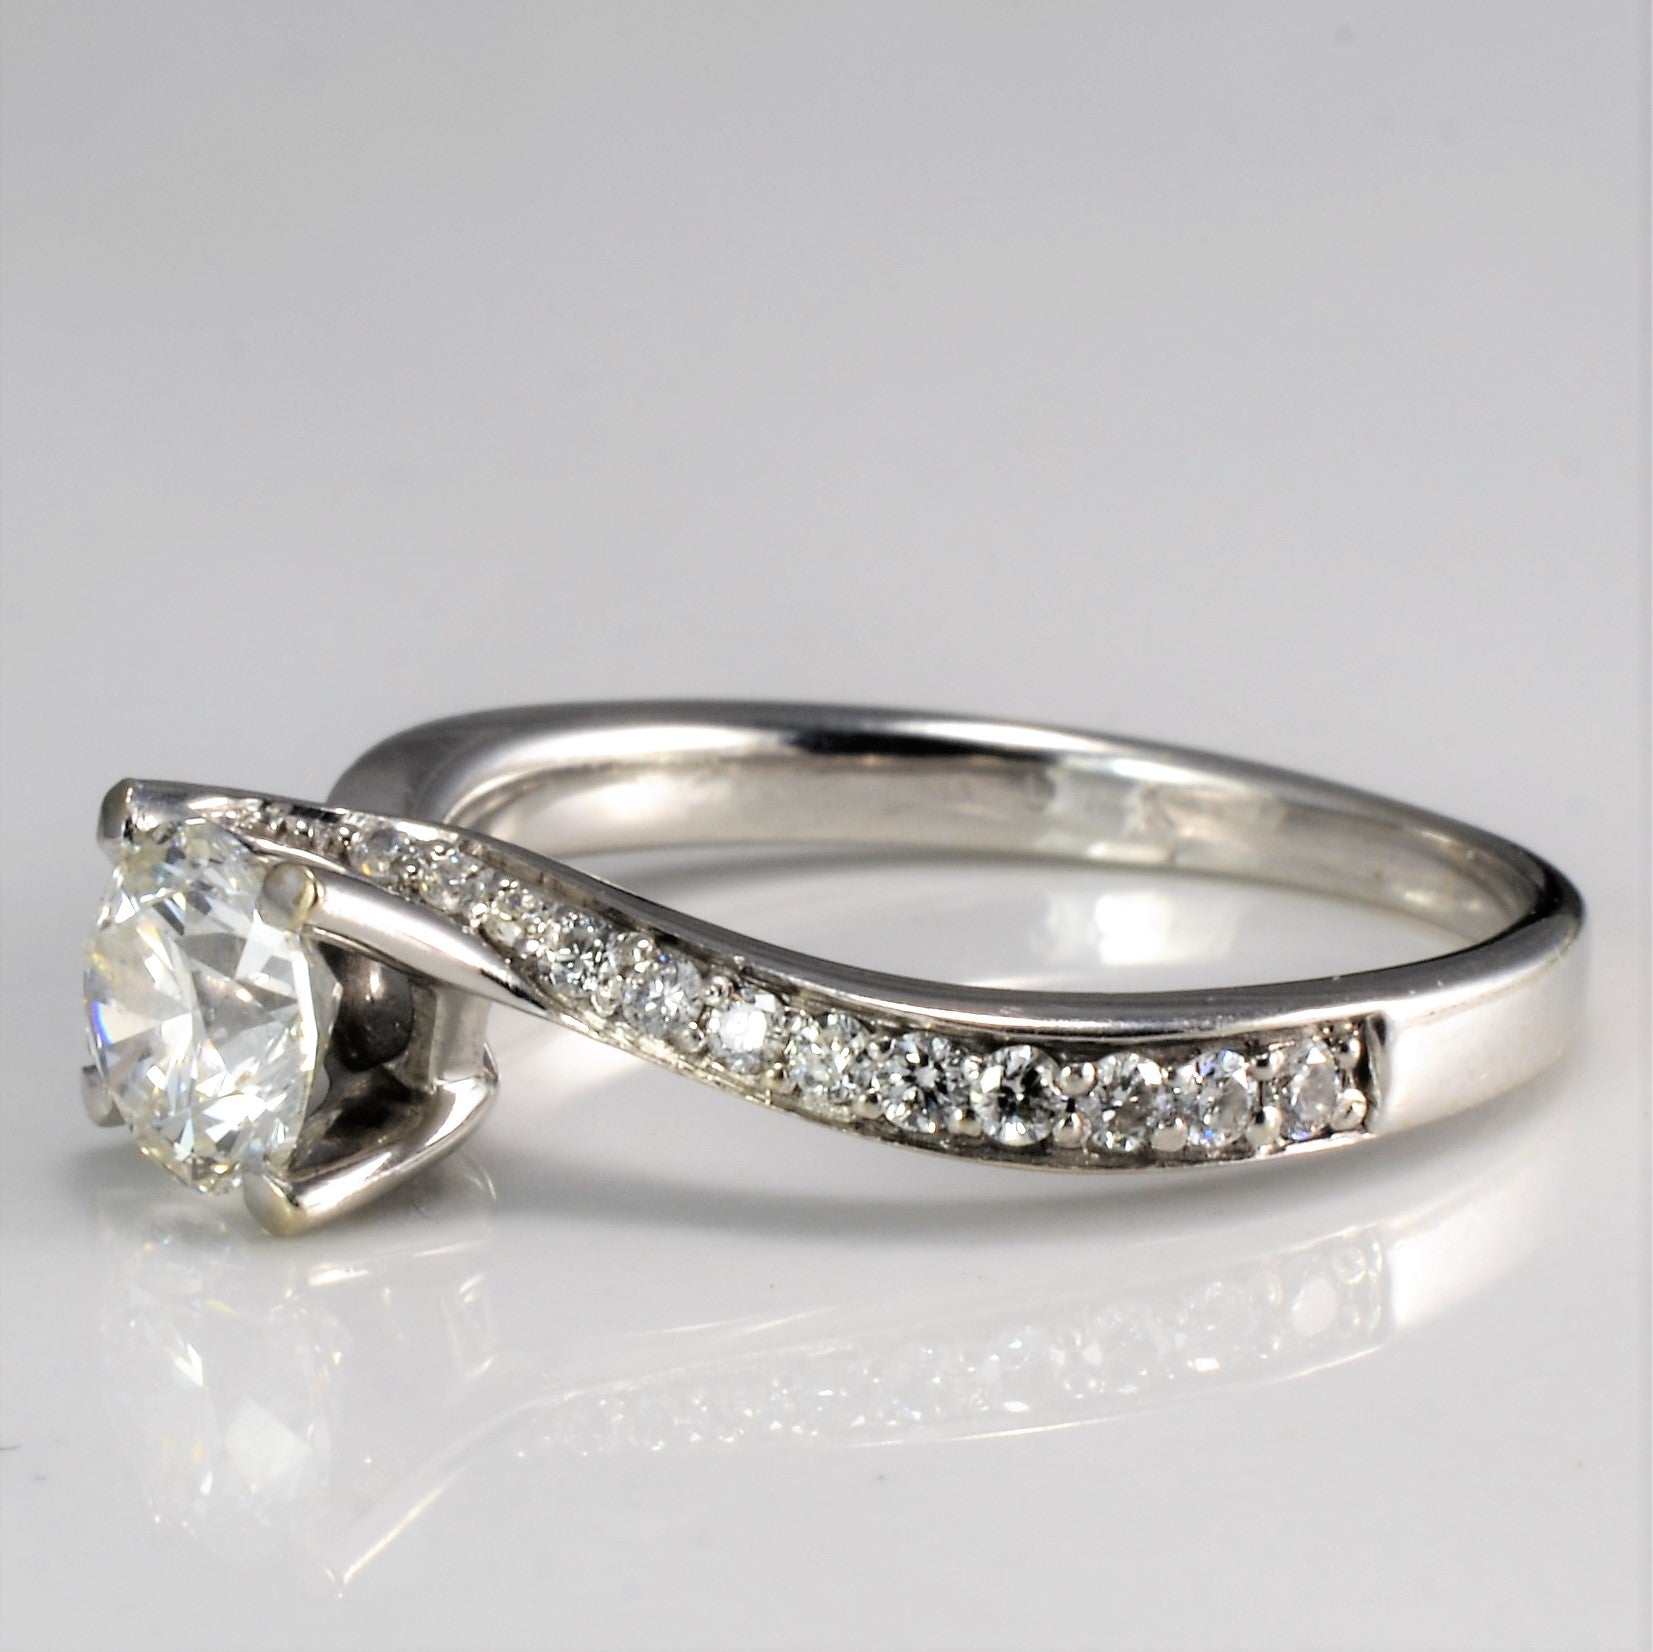 Solitaire with Accents Canadian Diamond Engagement Ring | 0.73 ctw, SZ 4.75 |